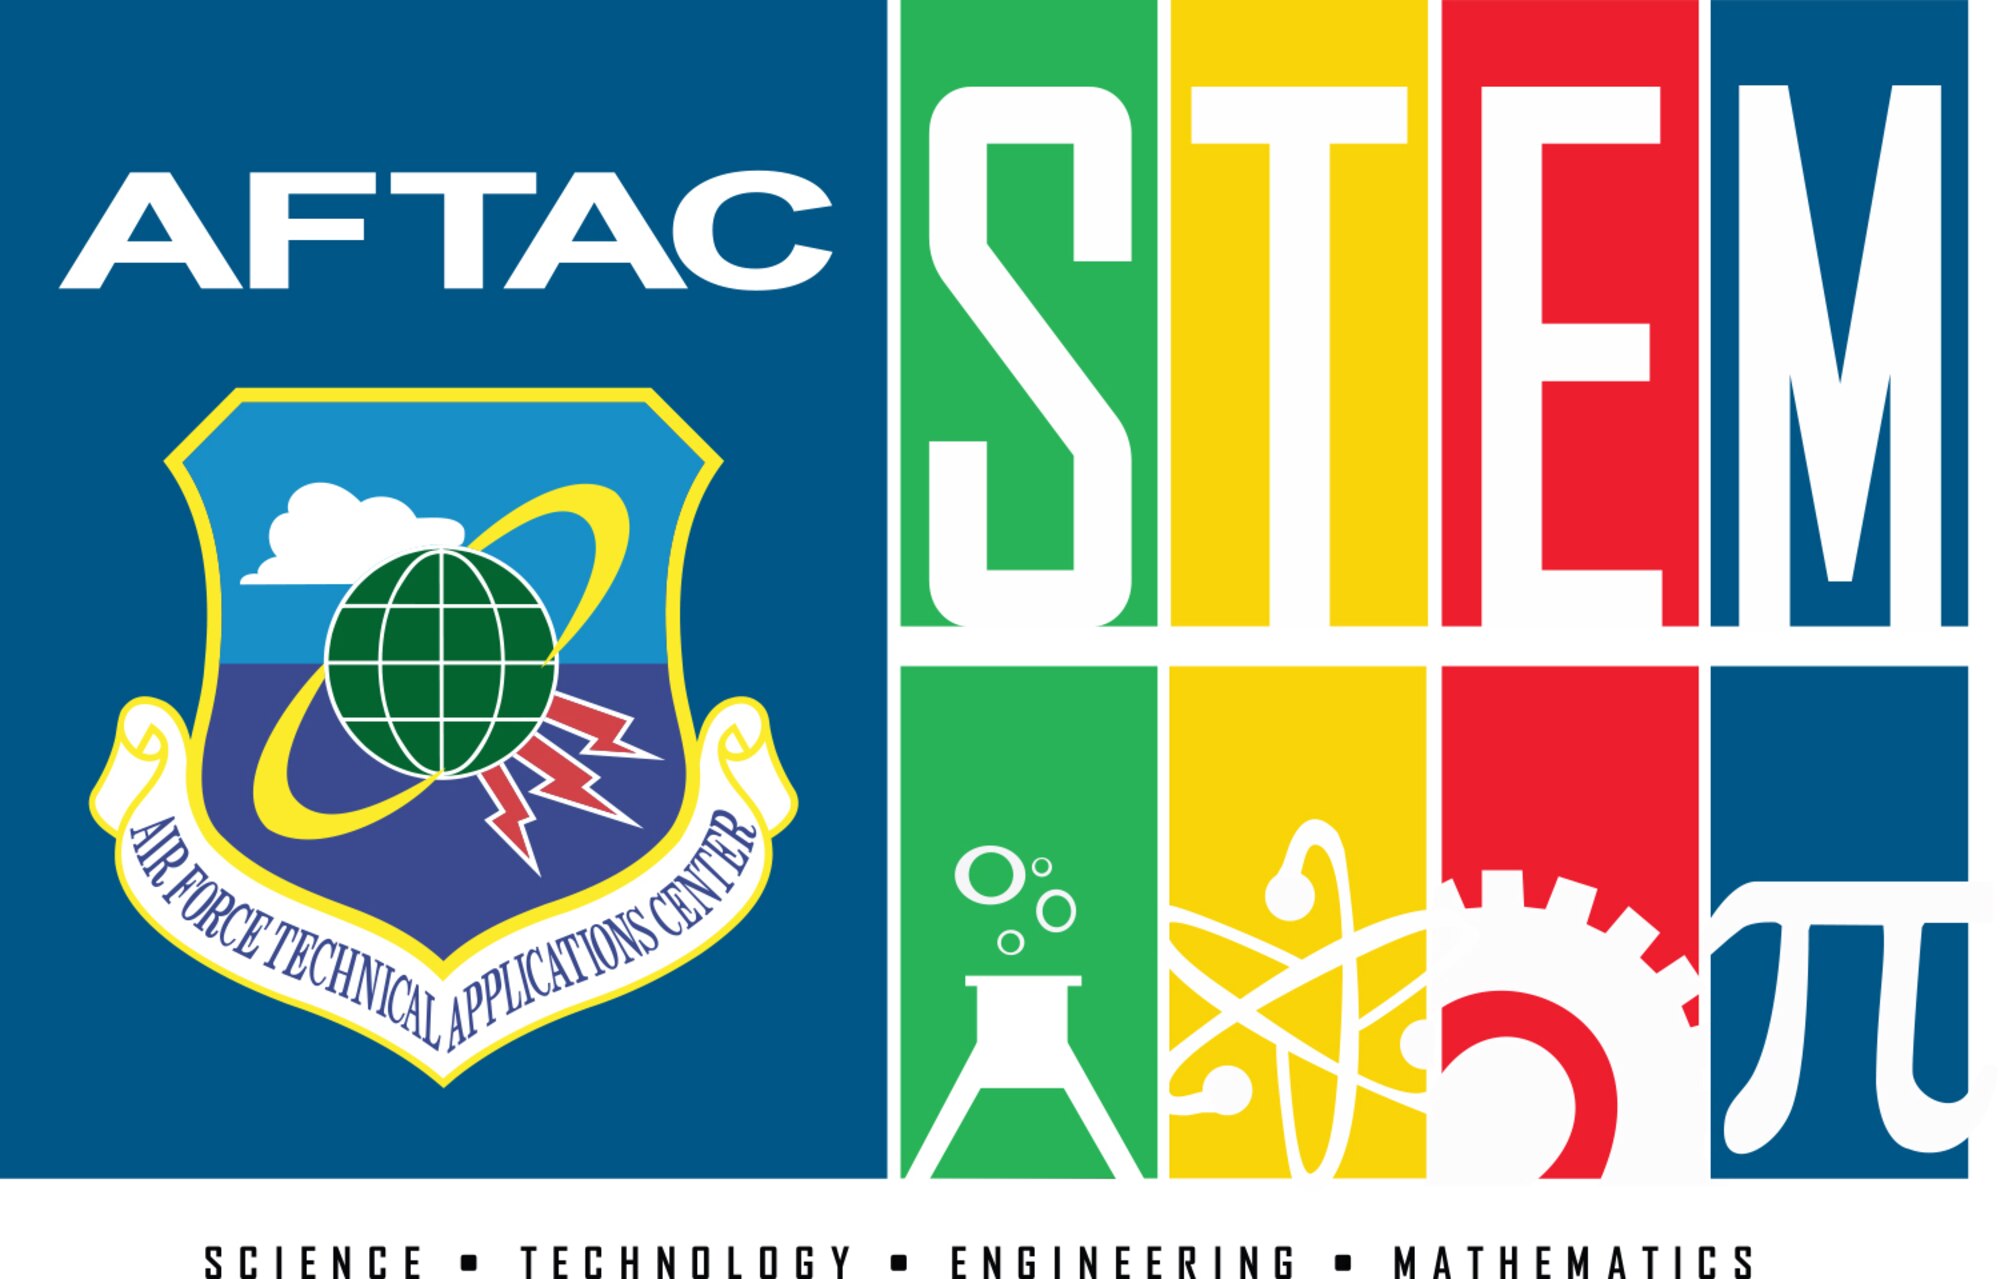 Graphic illustration of the Air Force Technical Applications Center’s STEM program.  